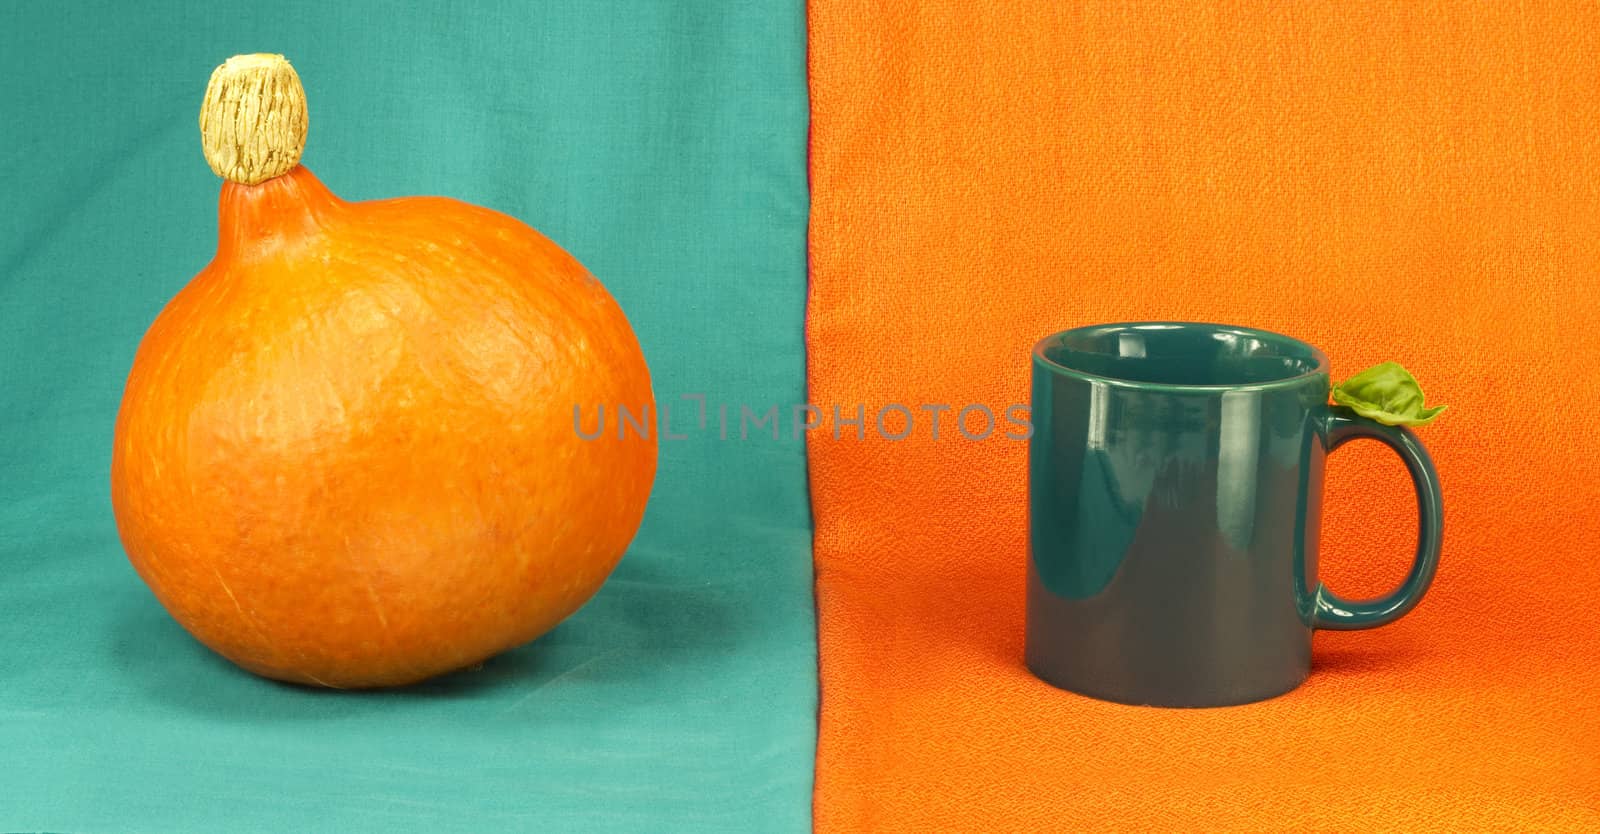 Still life of pumpkin and mug on a colorful background